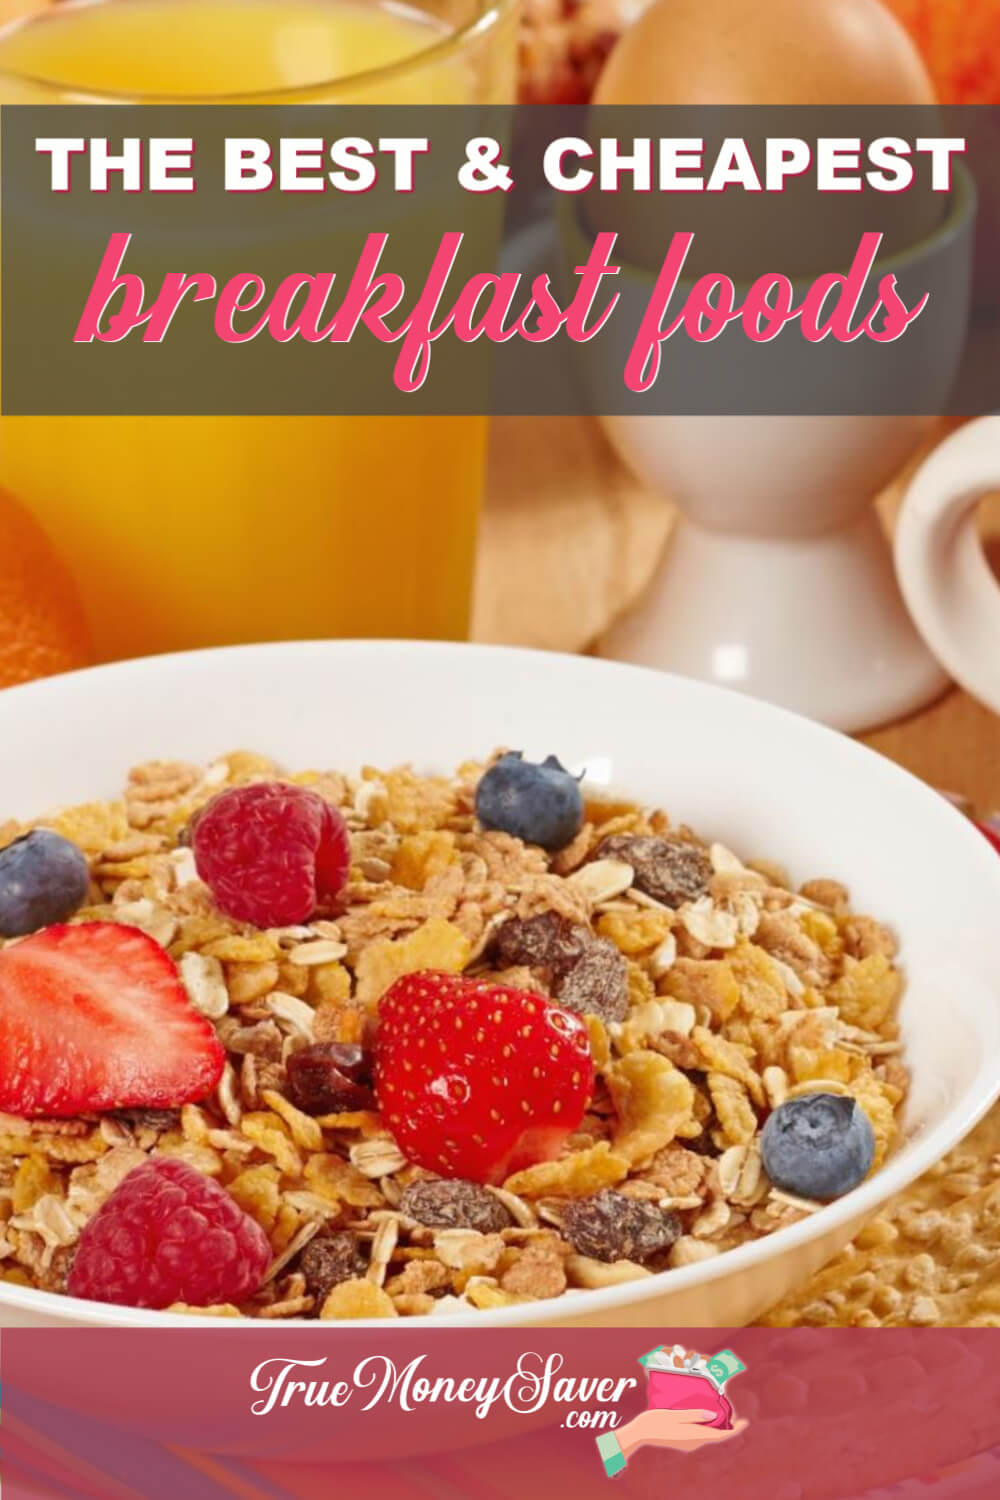 The Best Breakfast Foods To Feed Your Family On The Cheap (Free Price Comparison Download)